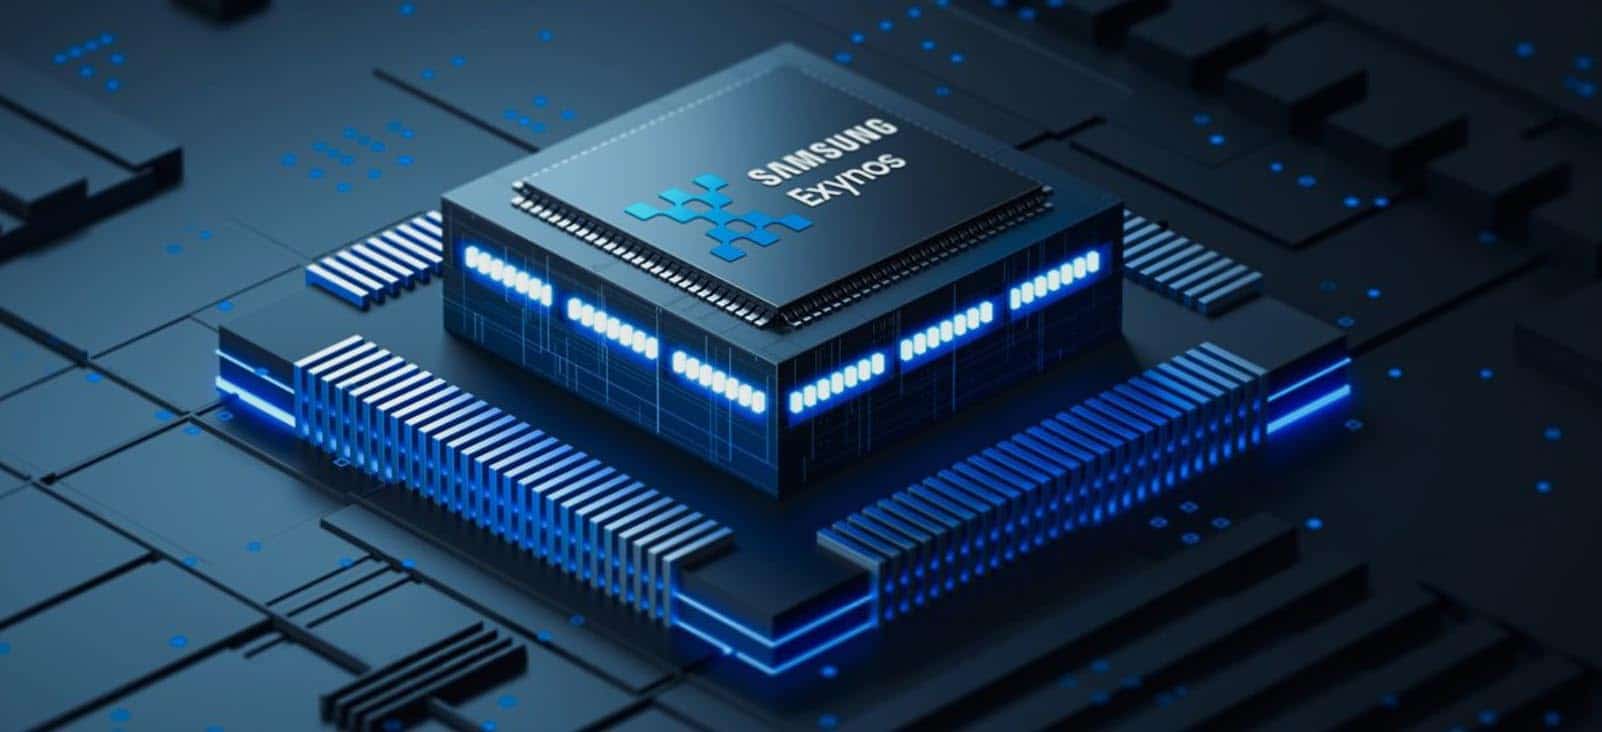 The quirky Samsung Exynos 2200 has leaked. The company may have problems